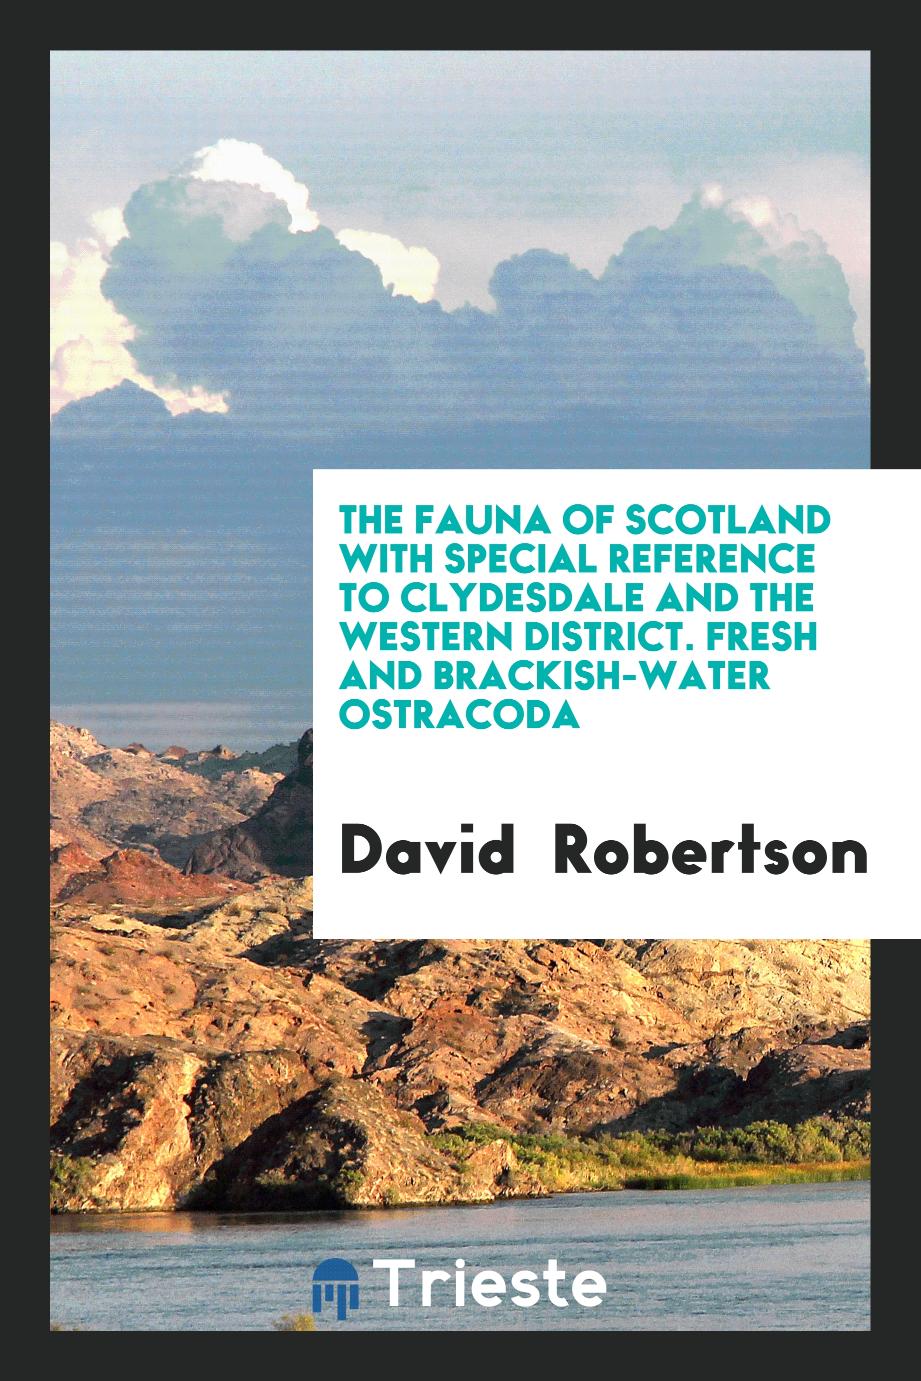 The Fauna of Scotland with special reference to Clydesdale and the Western District. Fresh and brackish-water ostracoda